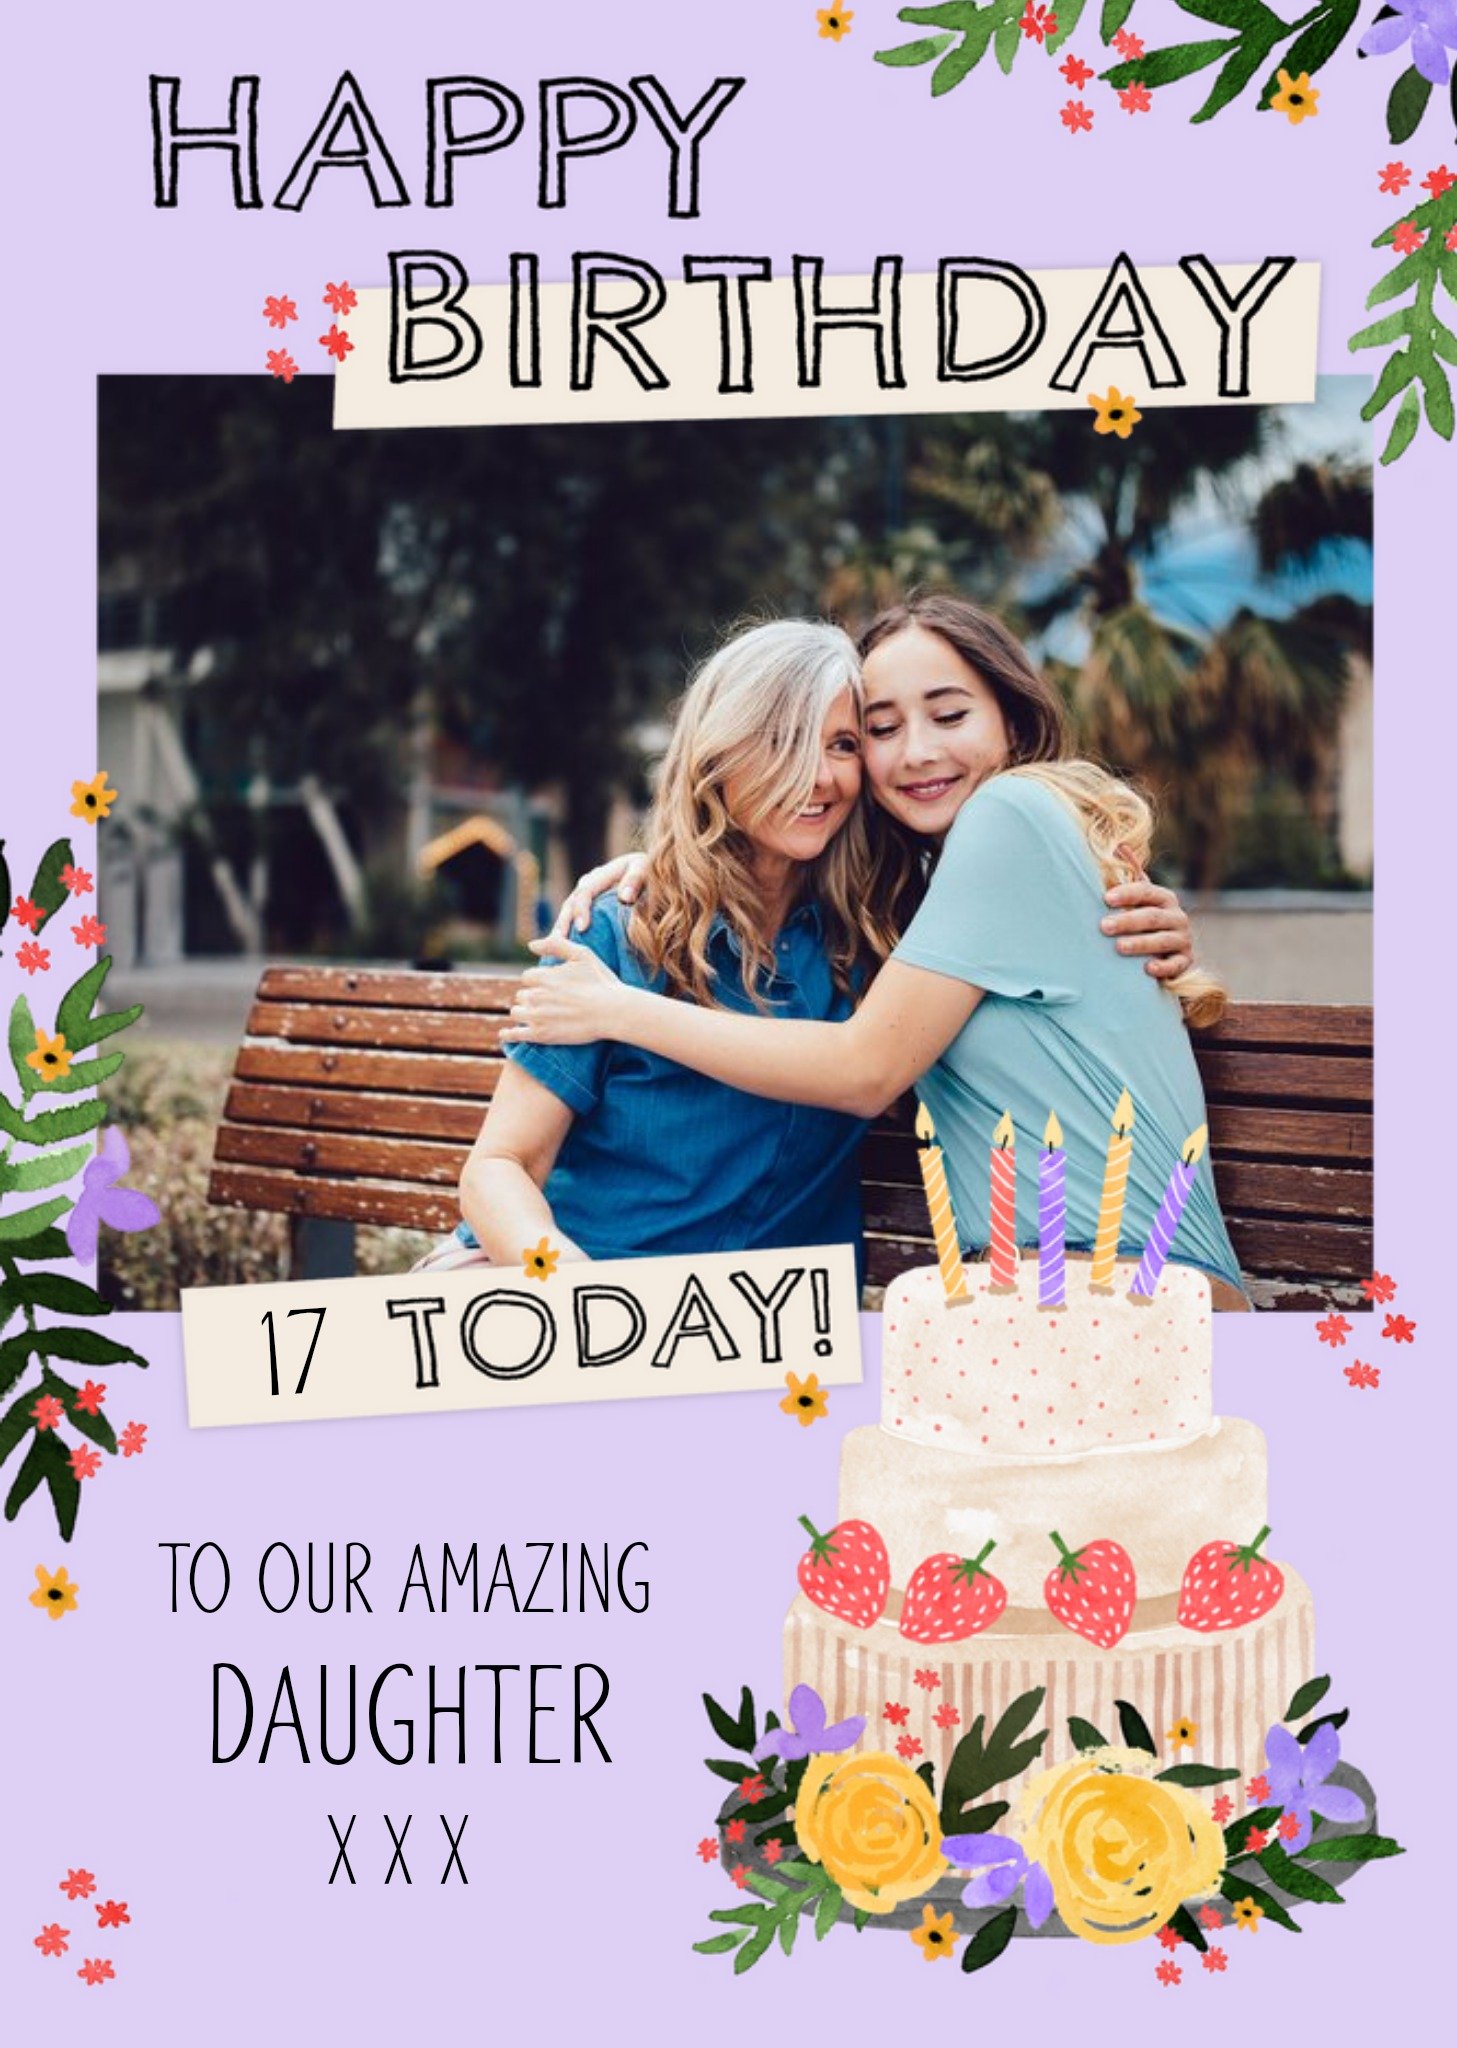 Making Meadows Decorated Cake Illustration Photo Upload Text Editable Daughter Birthday Card, Large